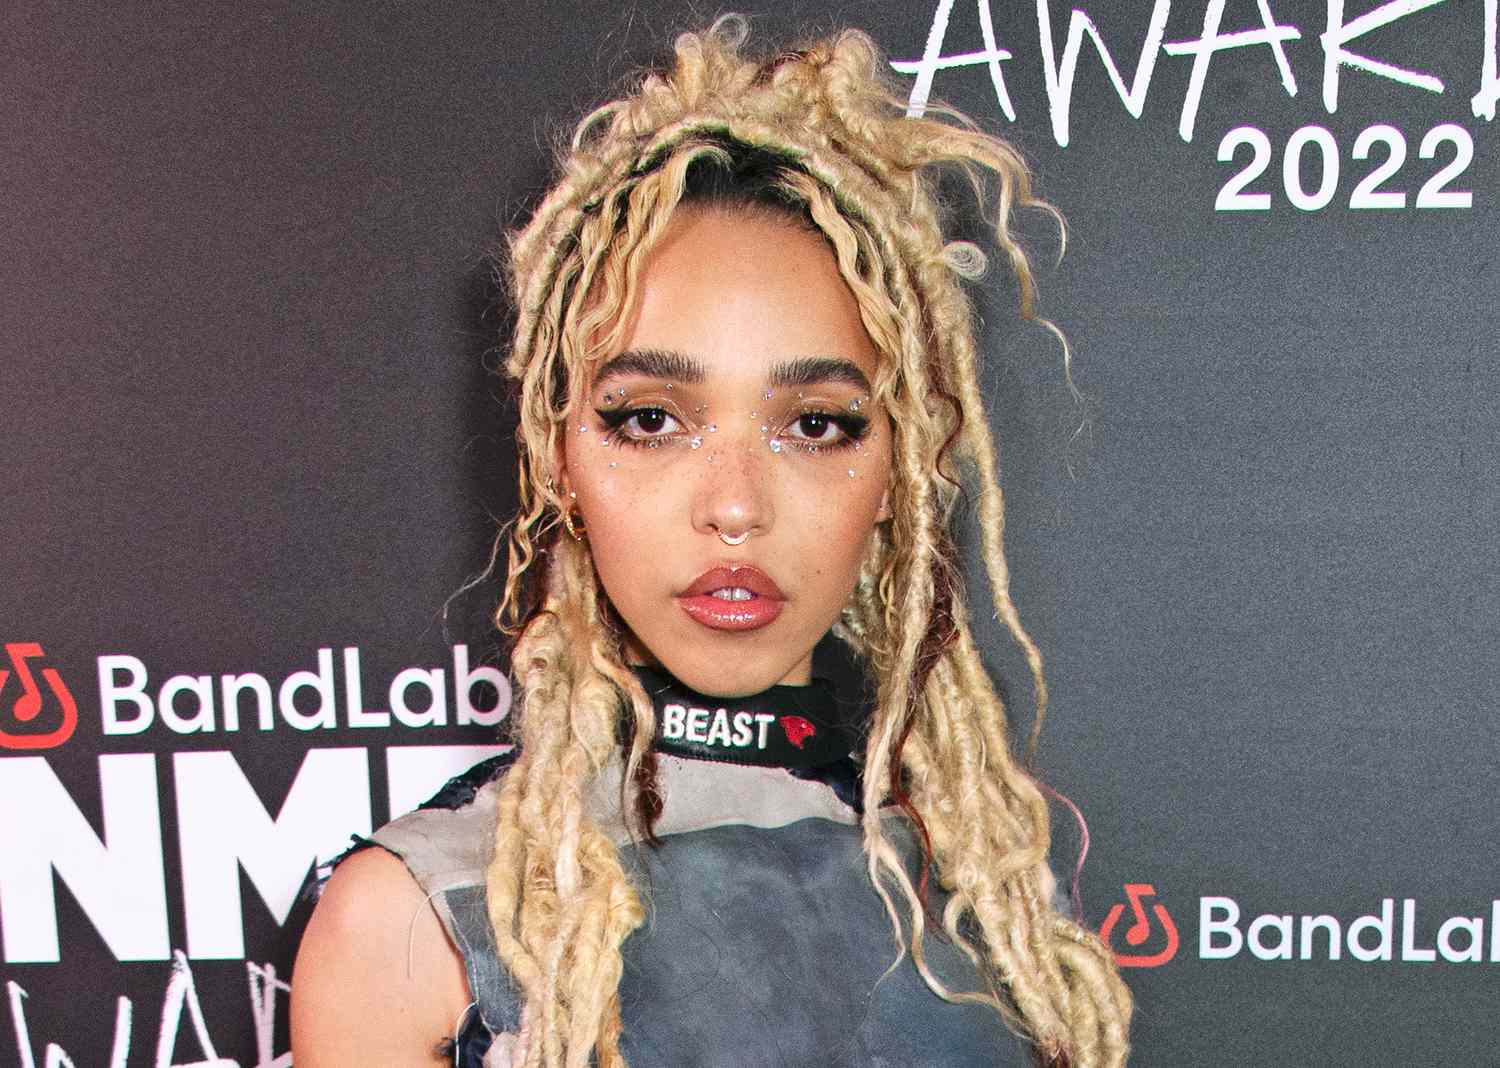 FKA Twigs arrives at The NME Awards 2022 at the O2 Academy Brixton on March 2, 2022 in London, England.